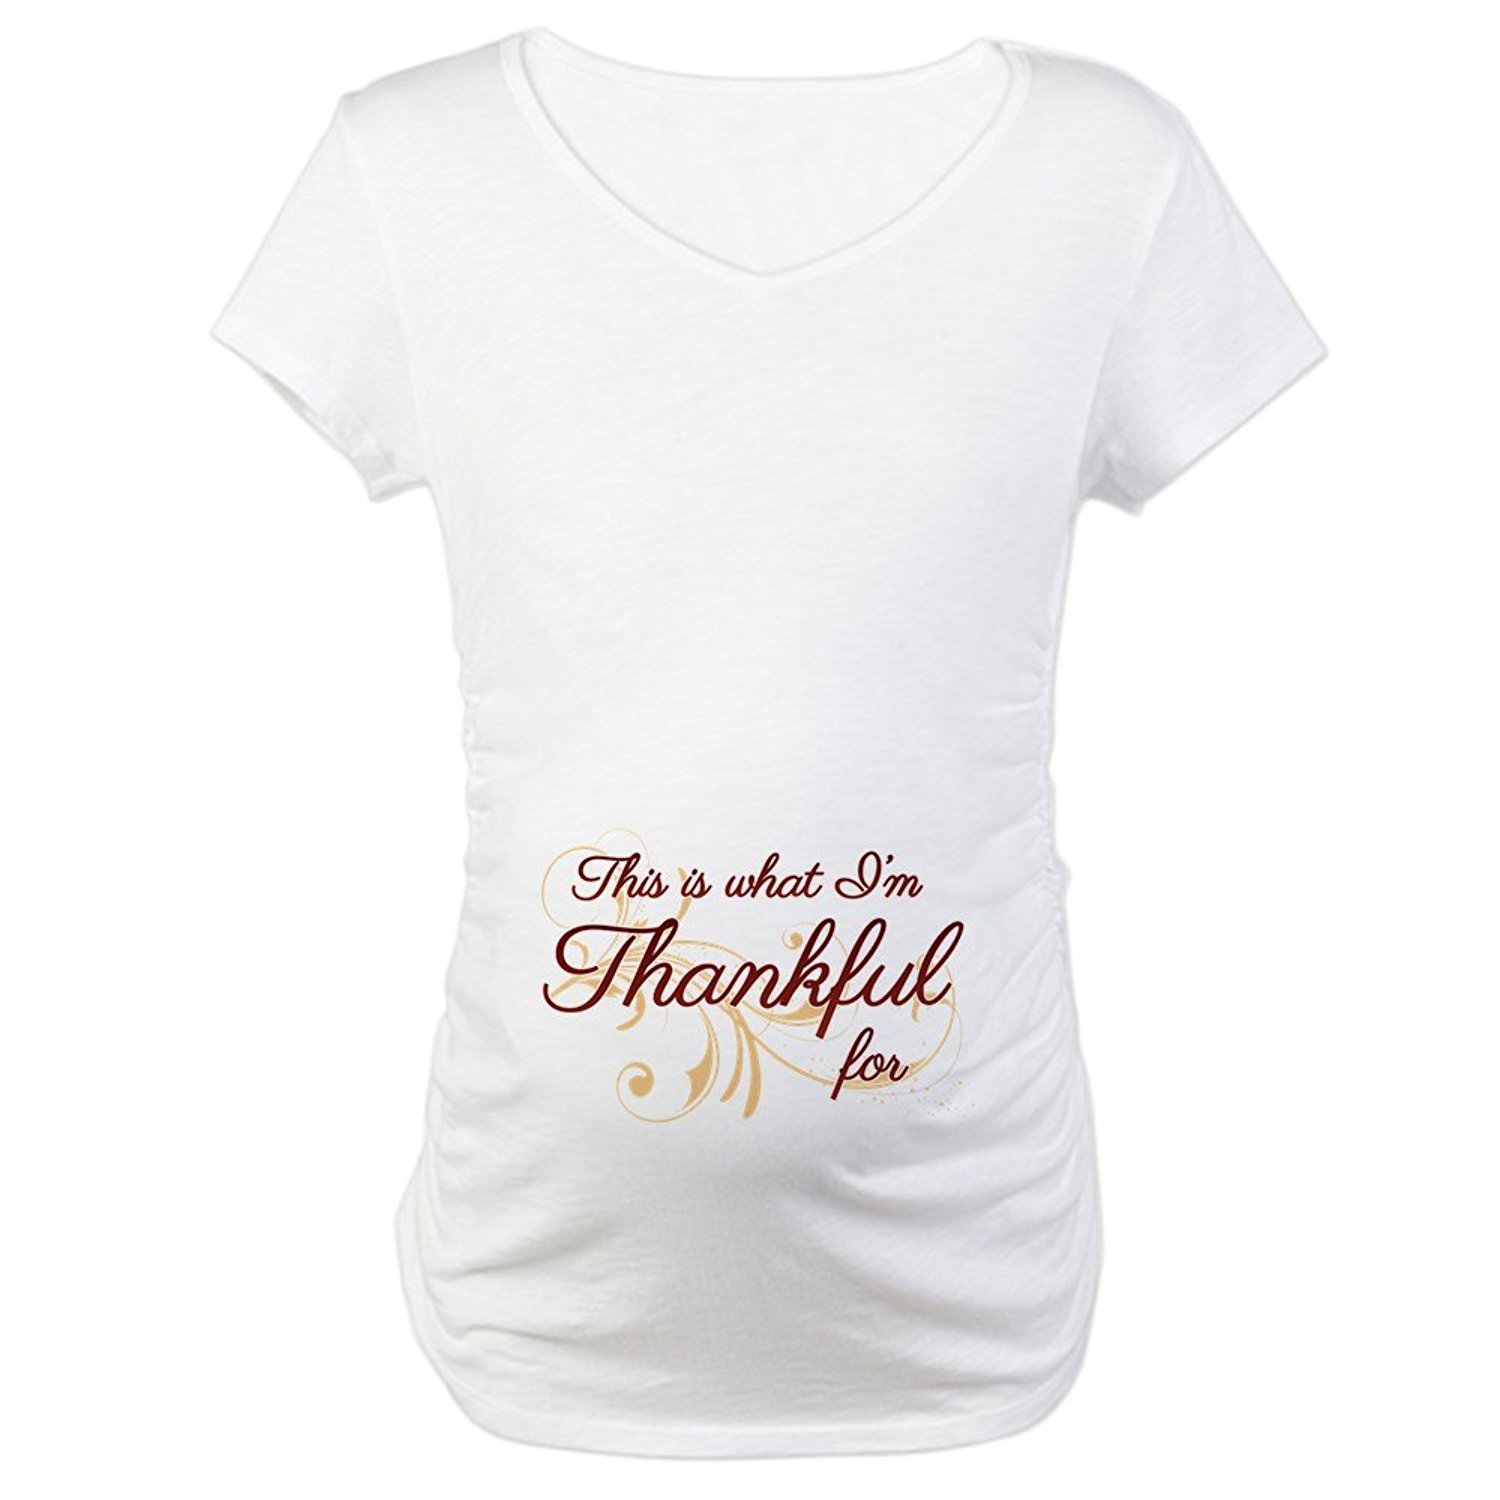 maternity shirts amazon.com: cafepress - this is what im thankful for - cotton maternity t- wmftlef